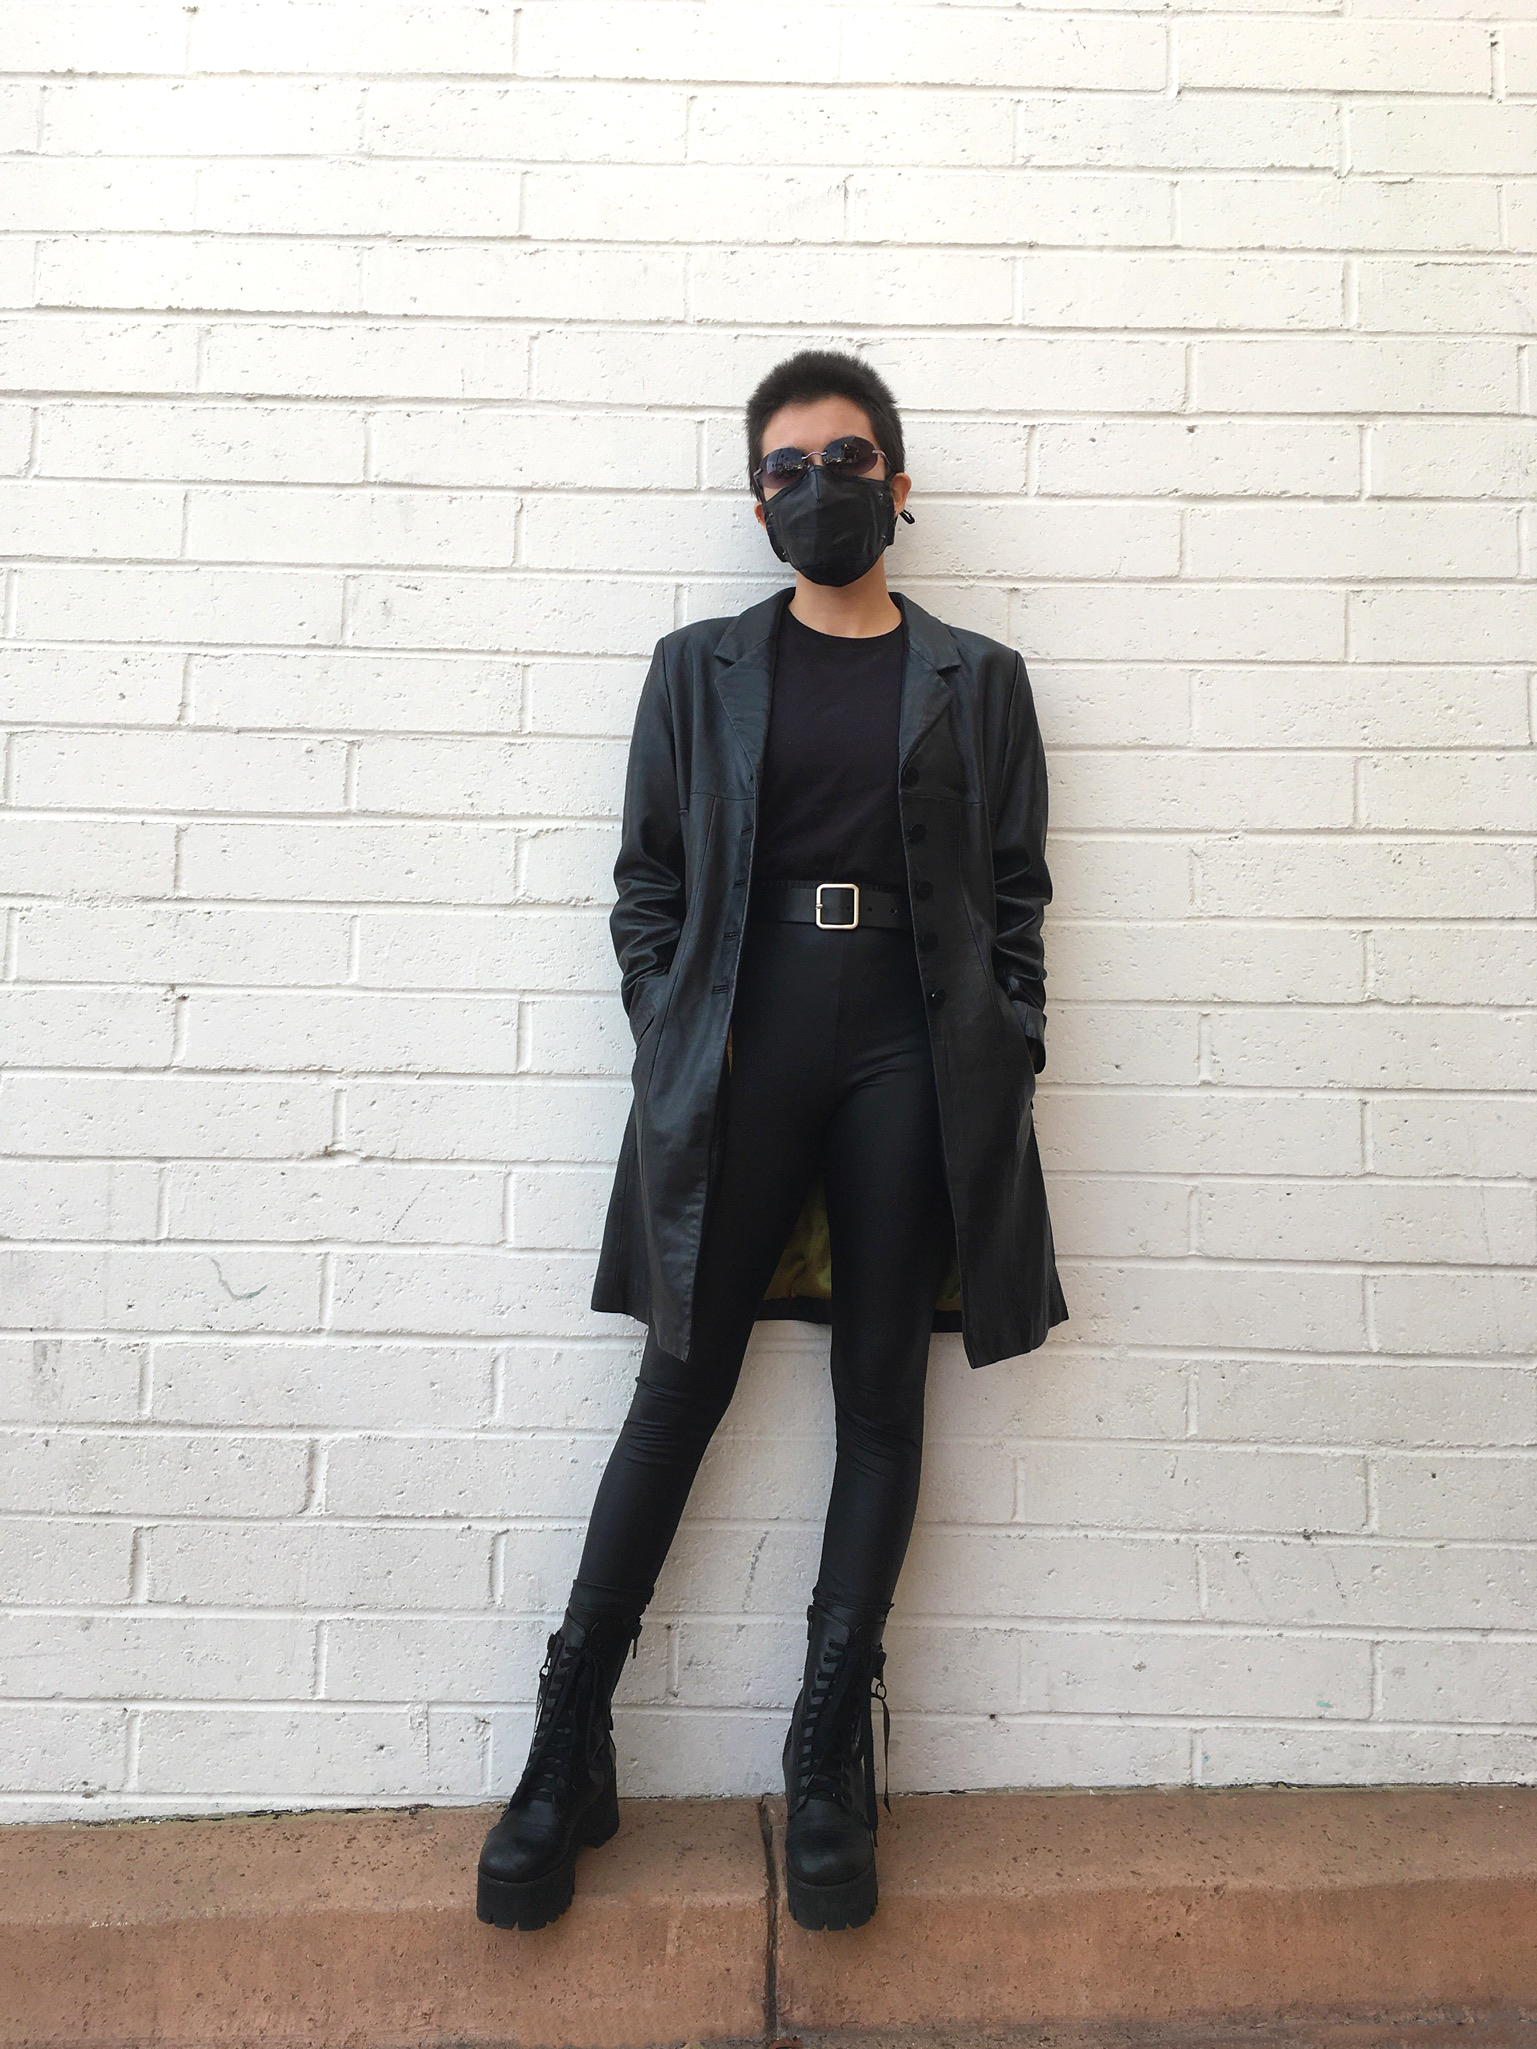 A person standing again a white brick wall wearing a full black outfit with a pleather trench coat, black skinny jeans and platform boots